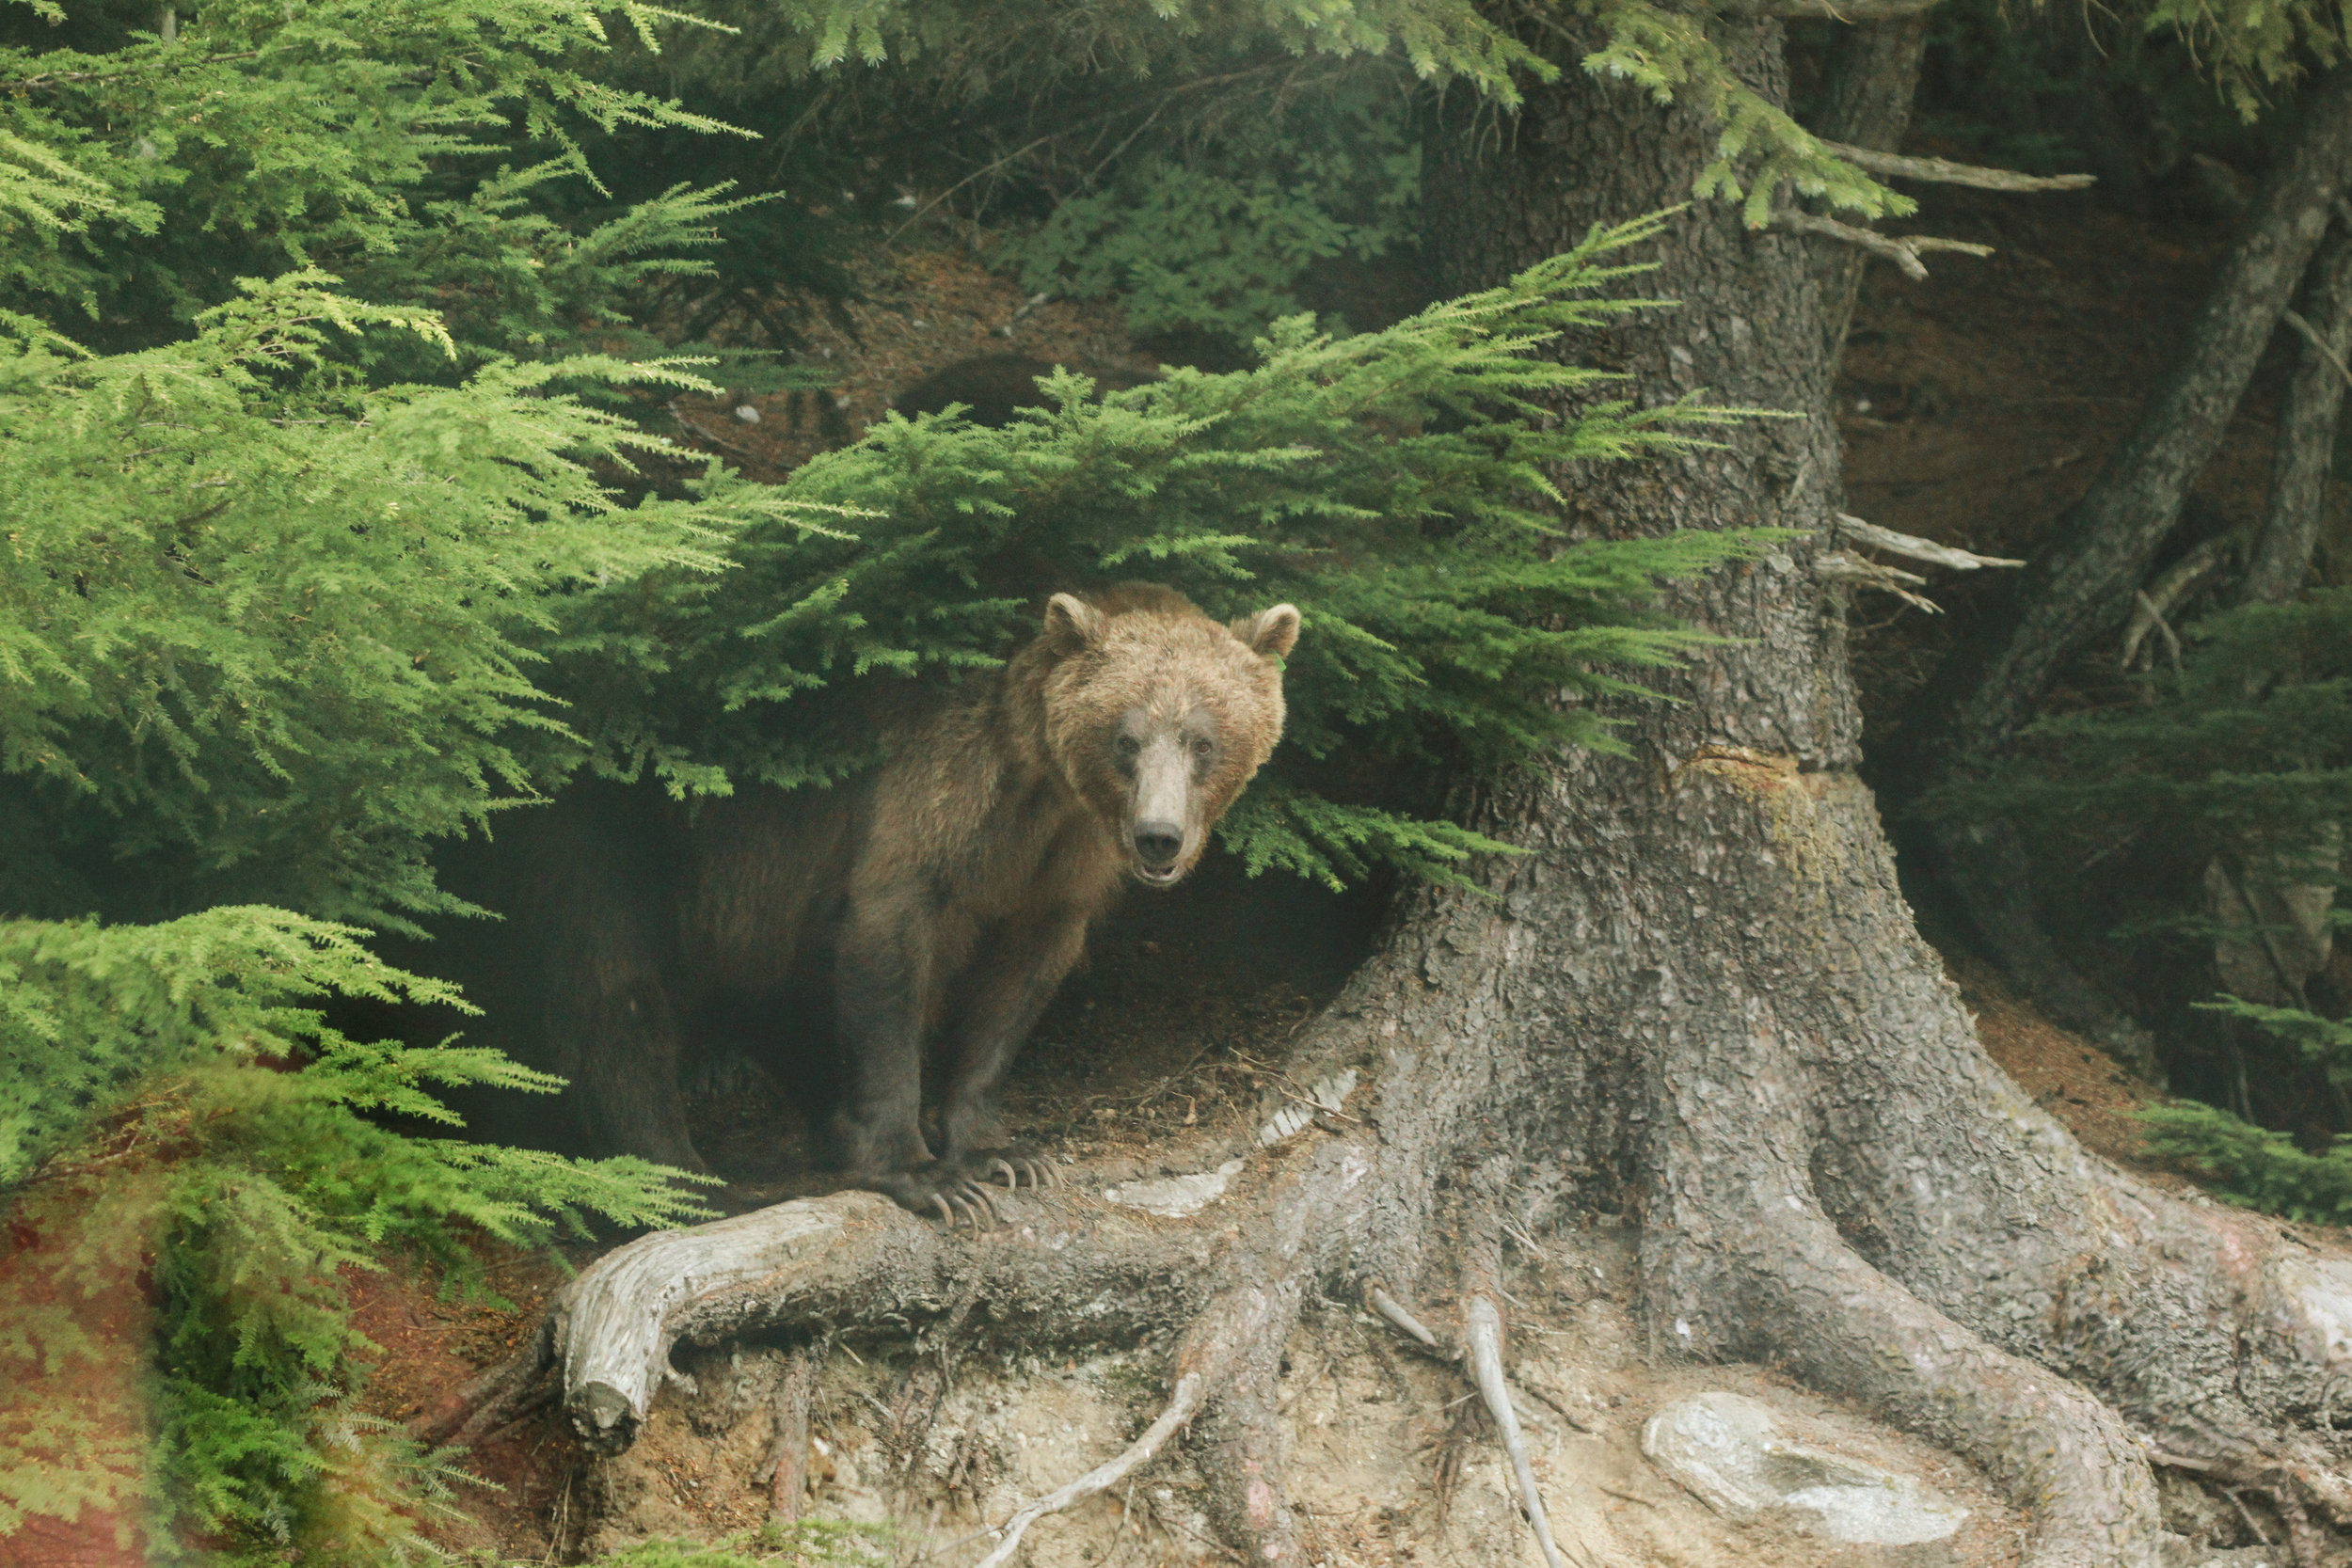 Grizzly Bear in Haines, Alaska Travel Blog | MALLORIE OWENS